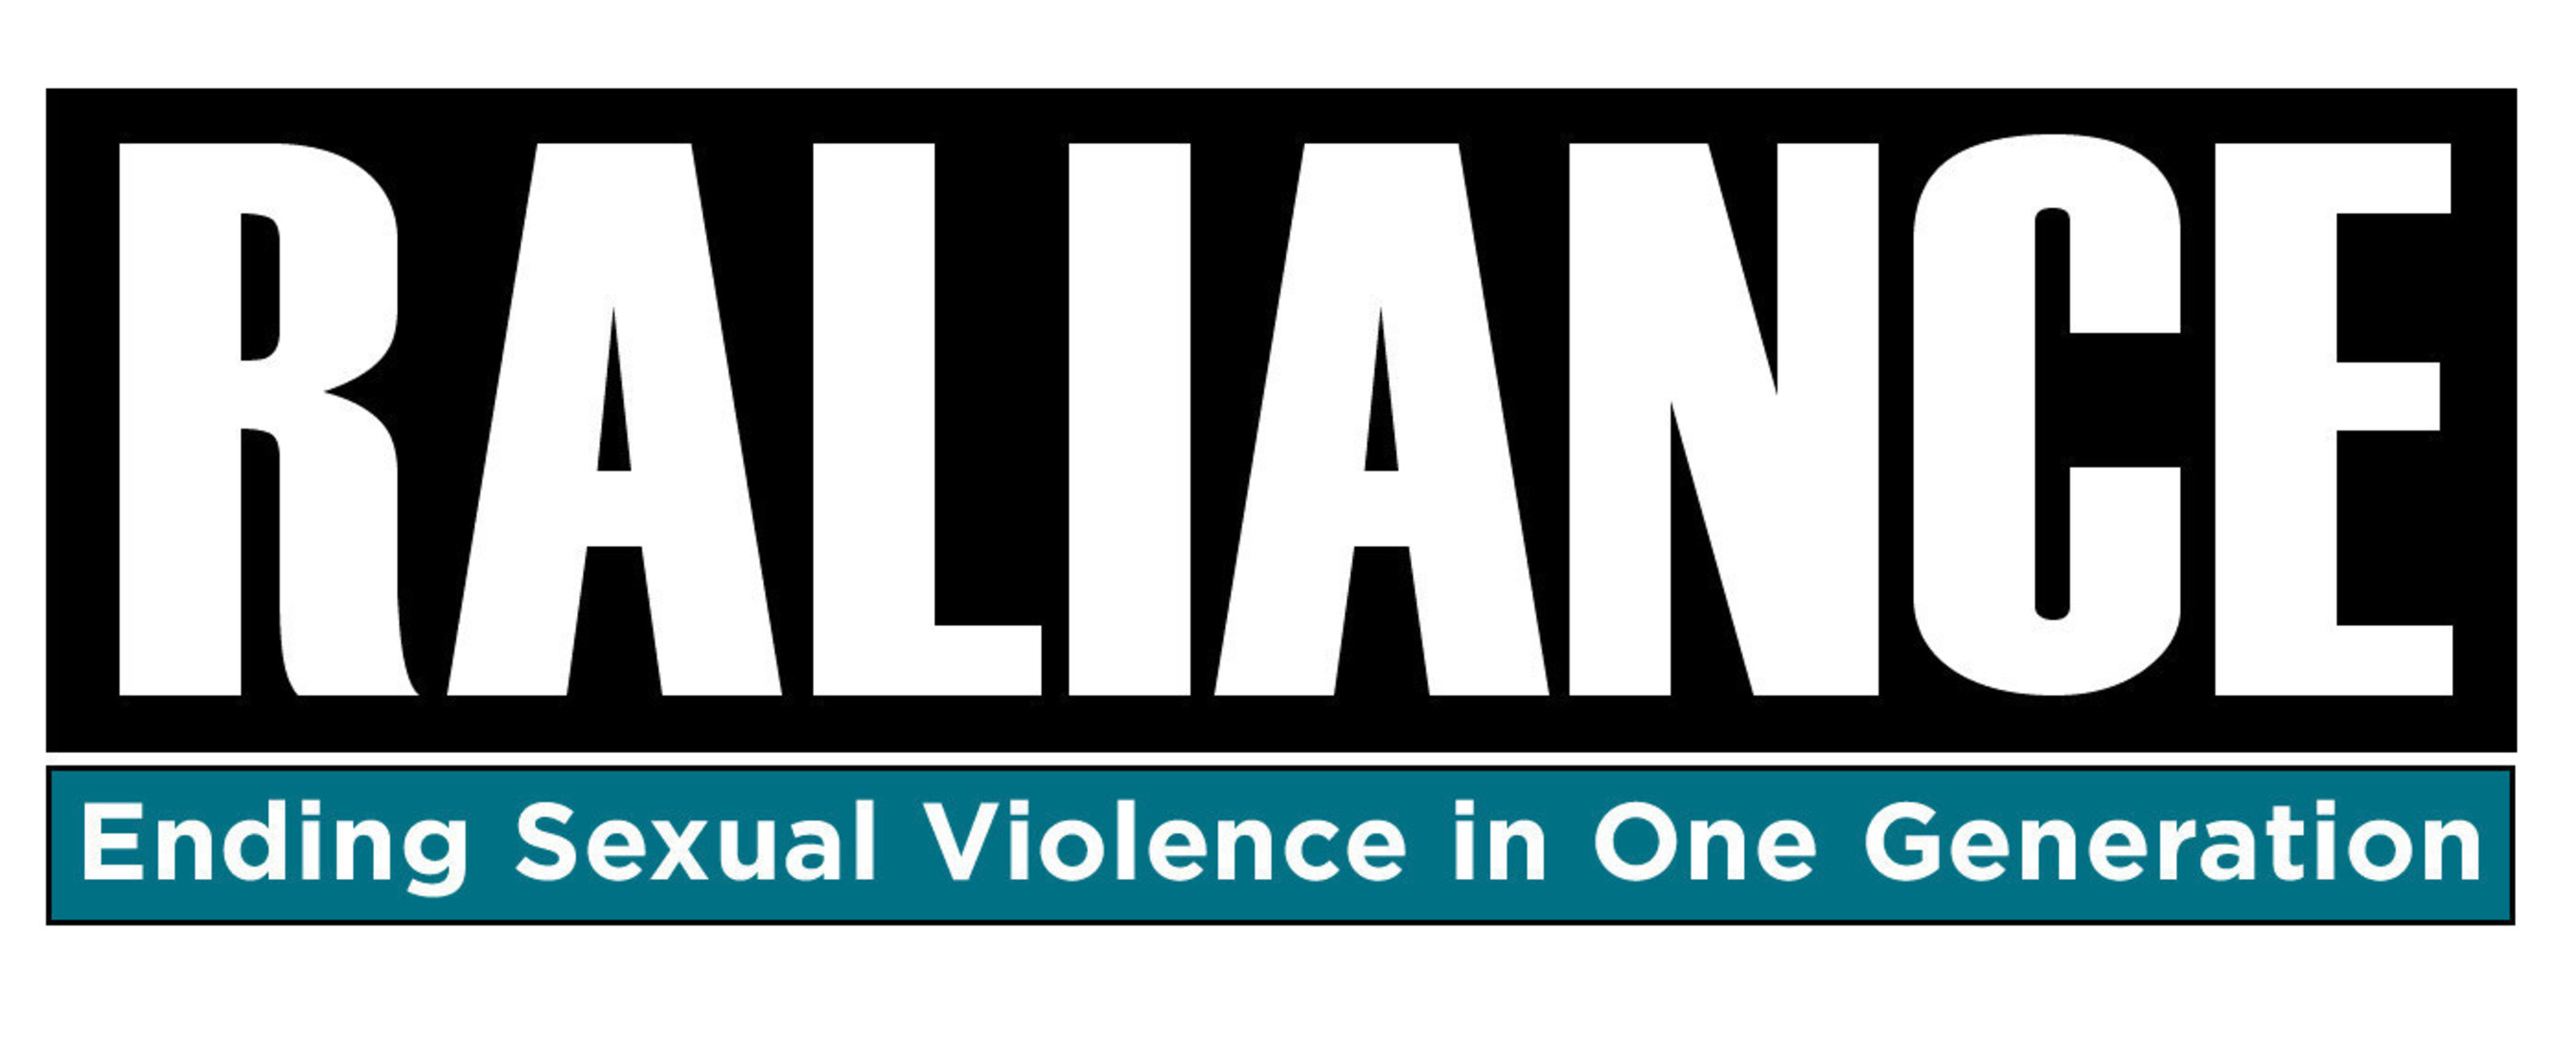 RALIANCE's mission is to end sexual harassment in one generation, and their 2021 grant totaling $150K will help achieve that goal. (Image credit: RALIANCE)